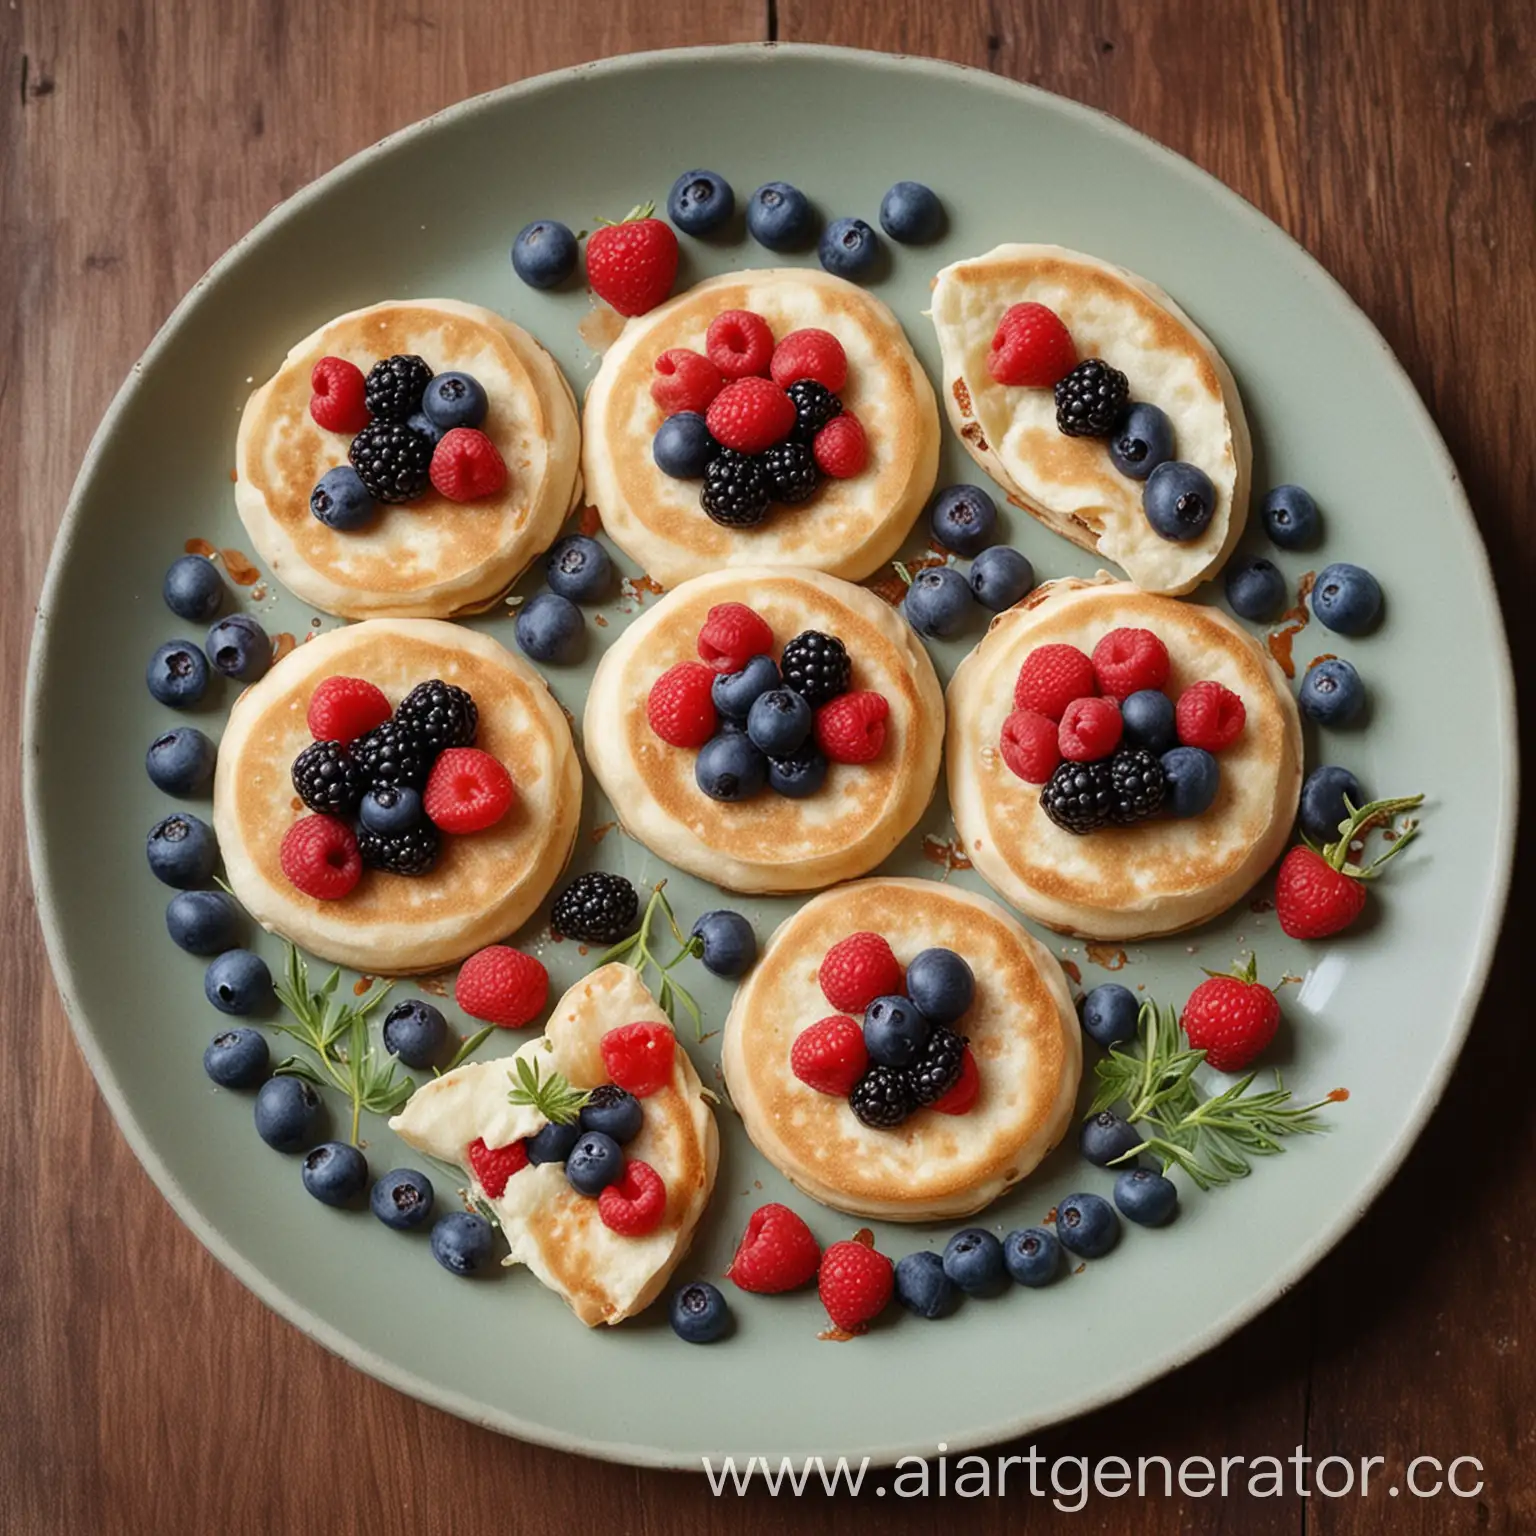 Delicious-Blini-and-Oladi-with-Fresh-Berries-Traditional-Russian-Pancakes-Photography